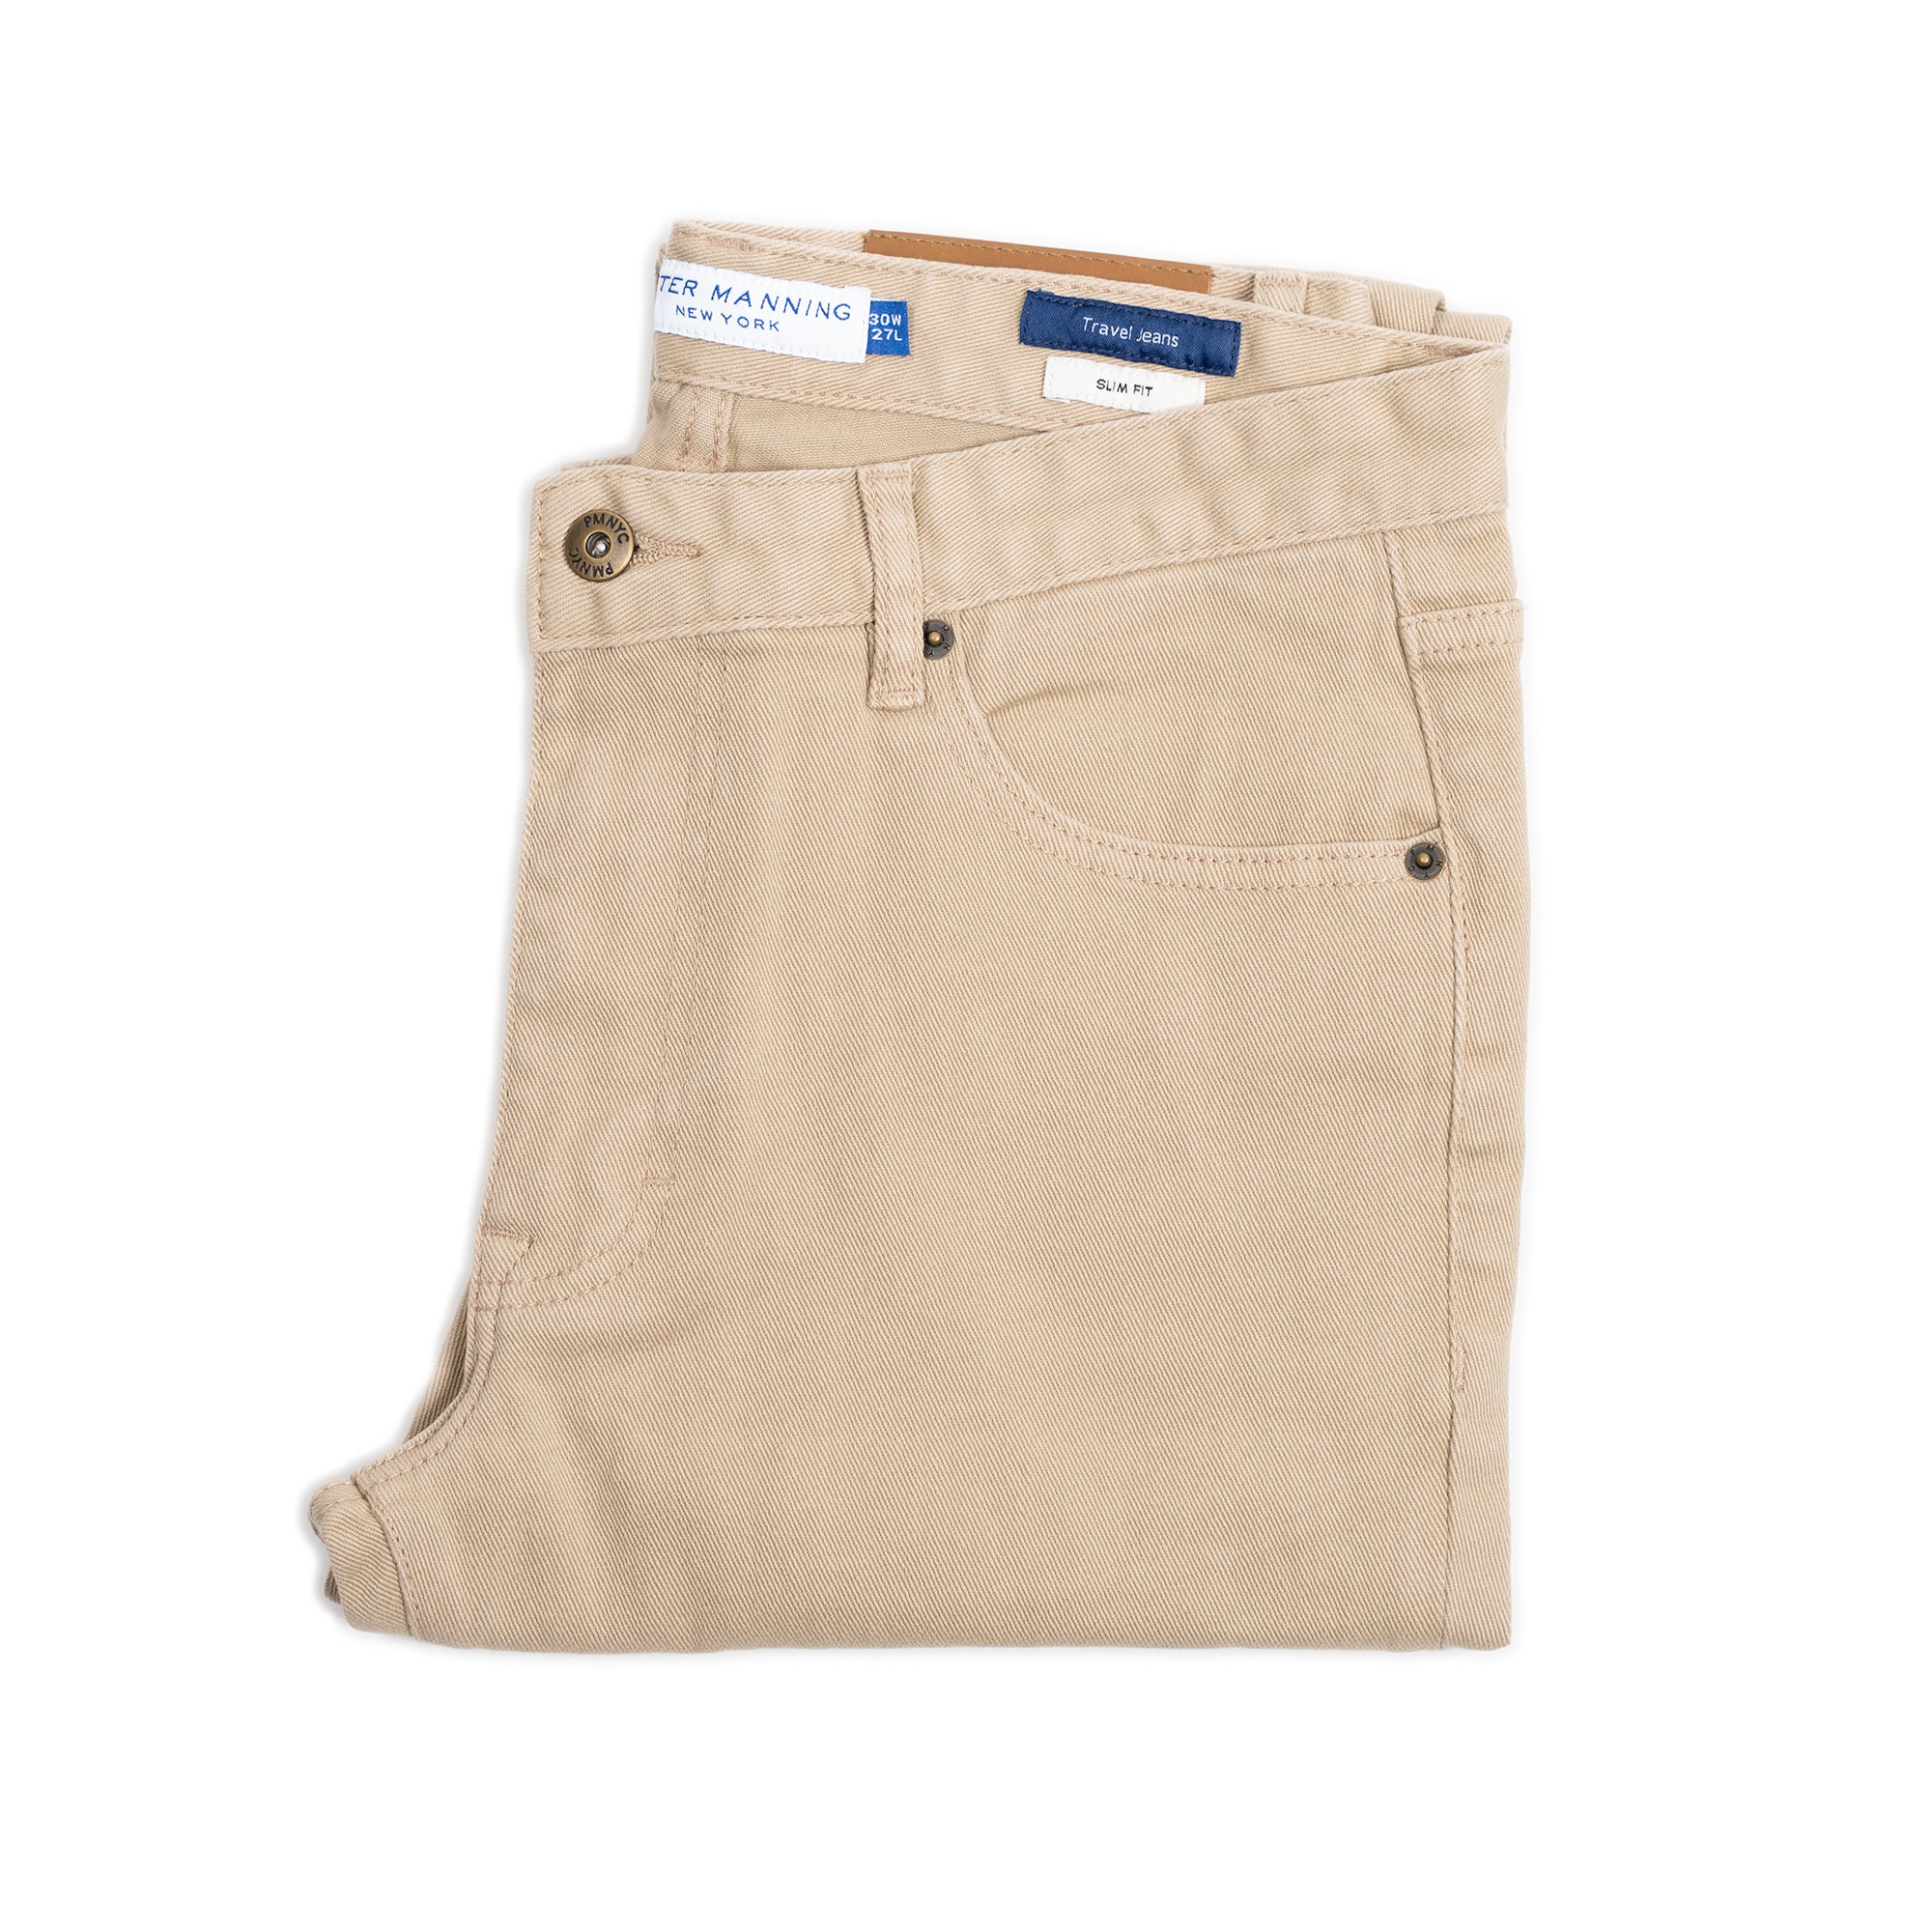 Travel Jeans Slim Fit, Tan | Peter Manning NYC